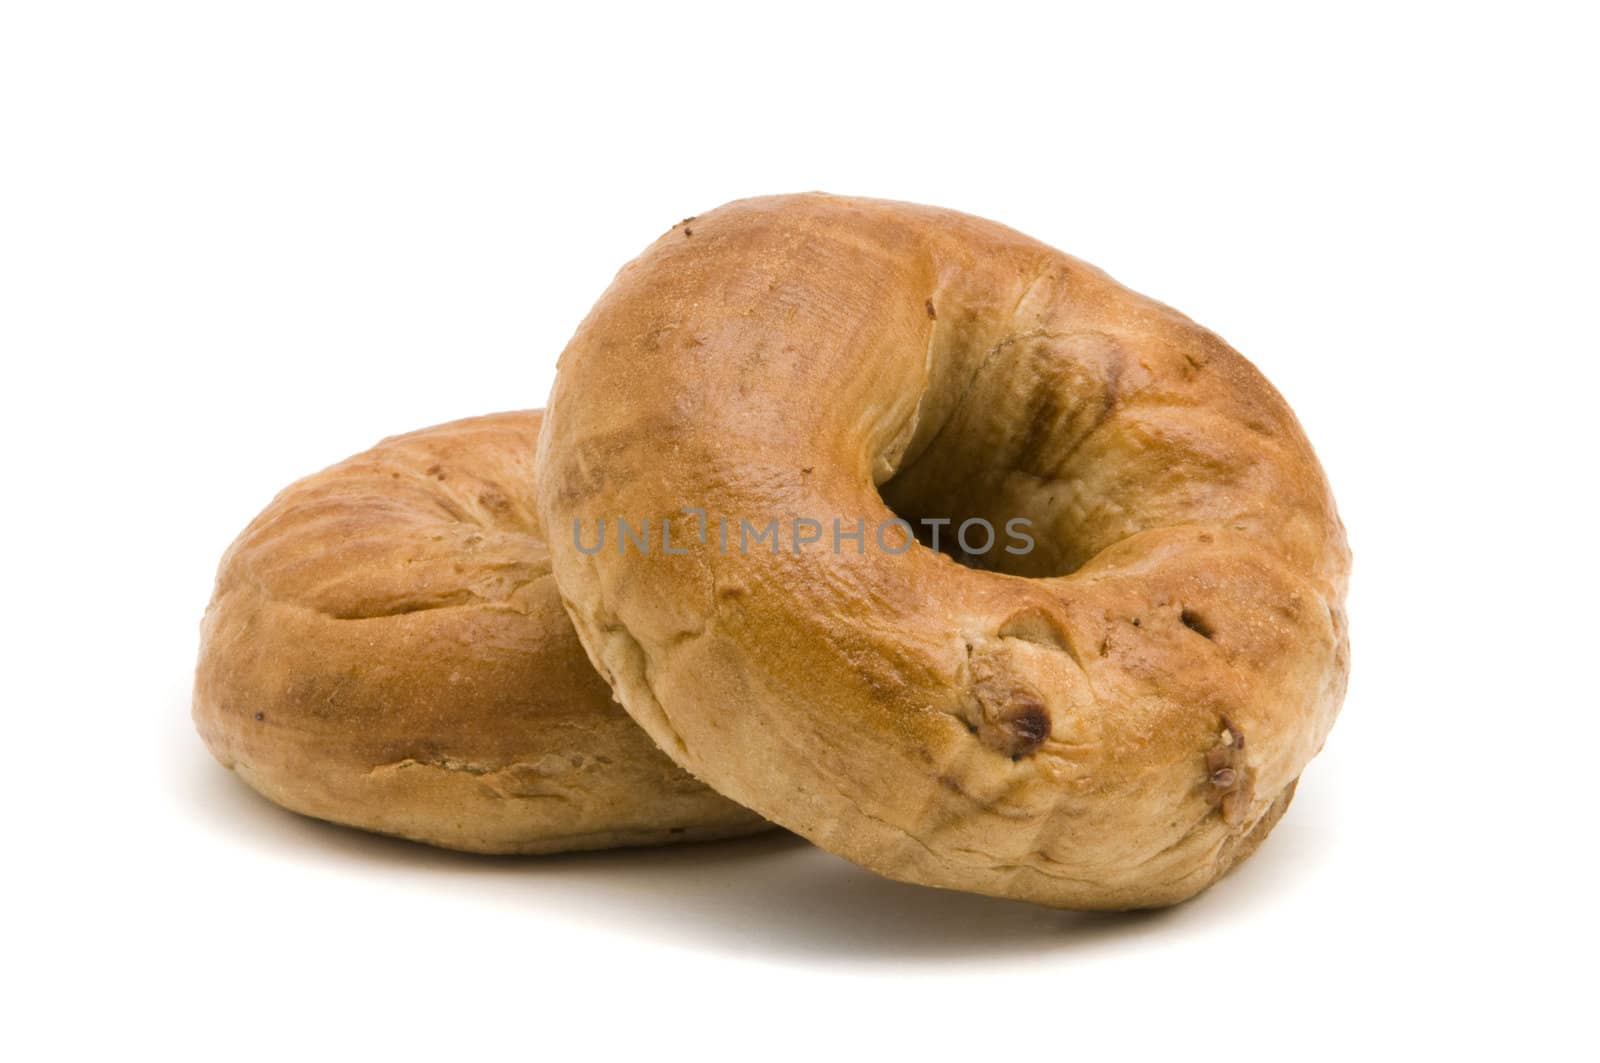 Two cinnamon bagels on a white background